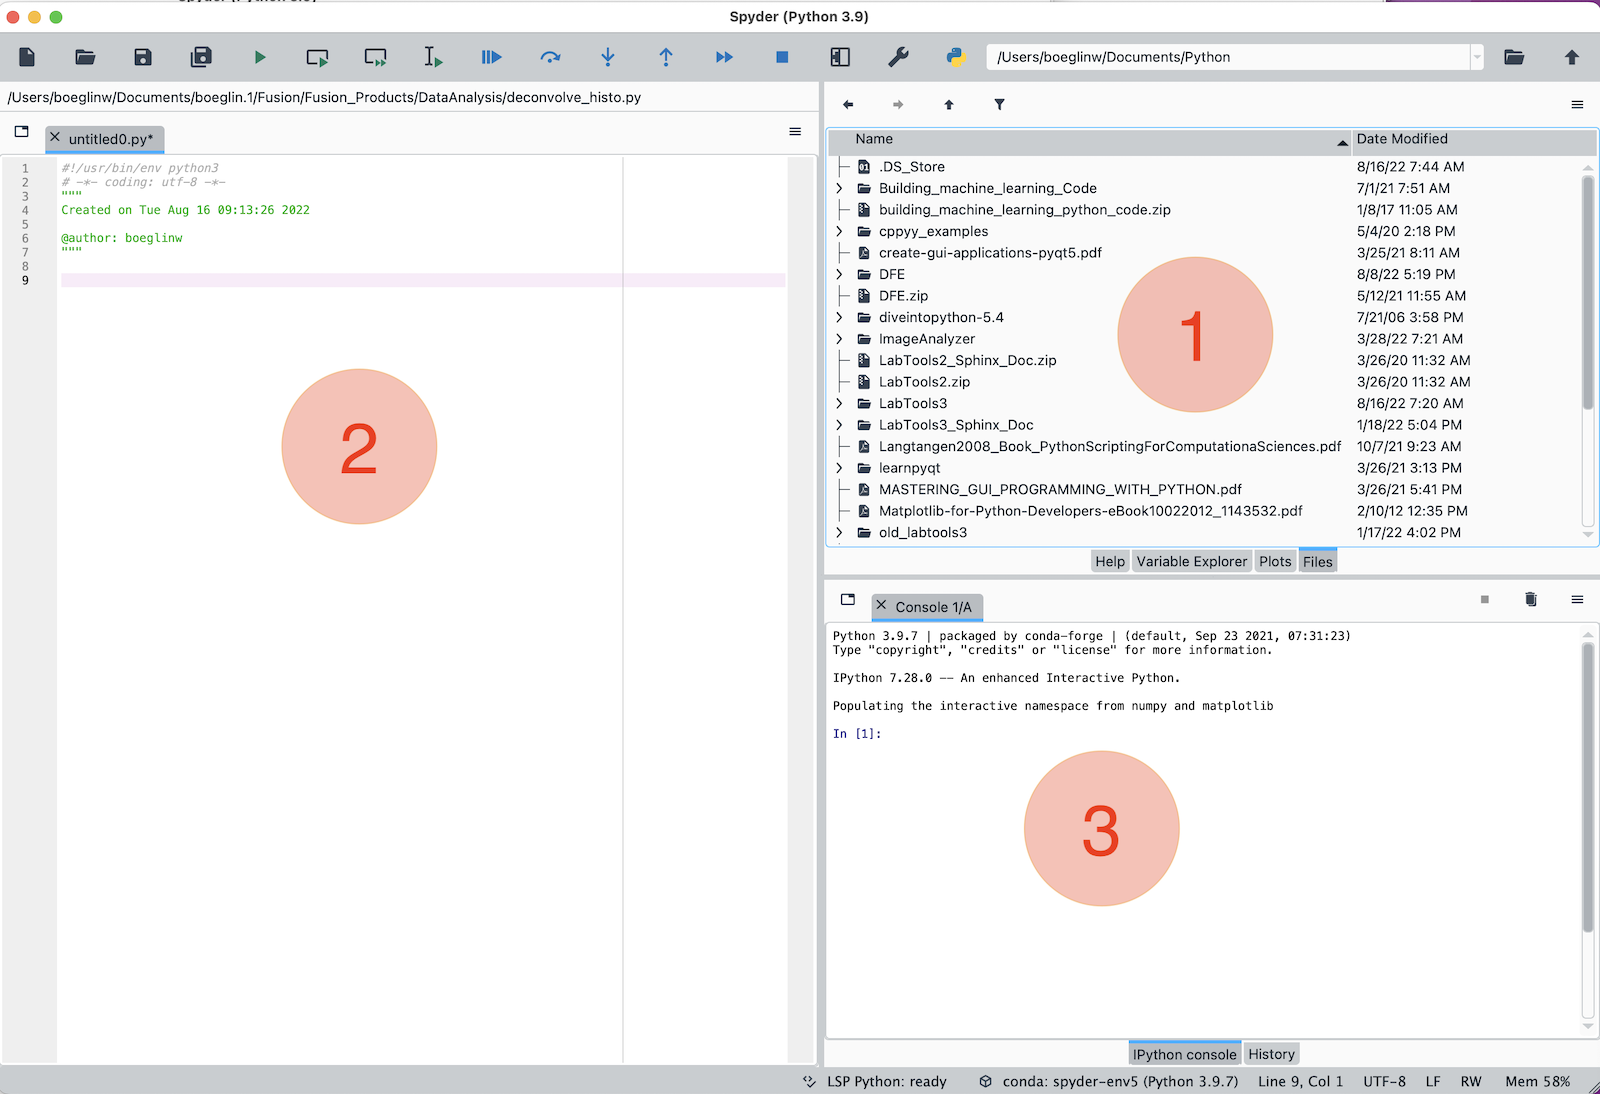 The recommended spyder layout: editor window left, file browser top right, IPython console bottom right.